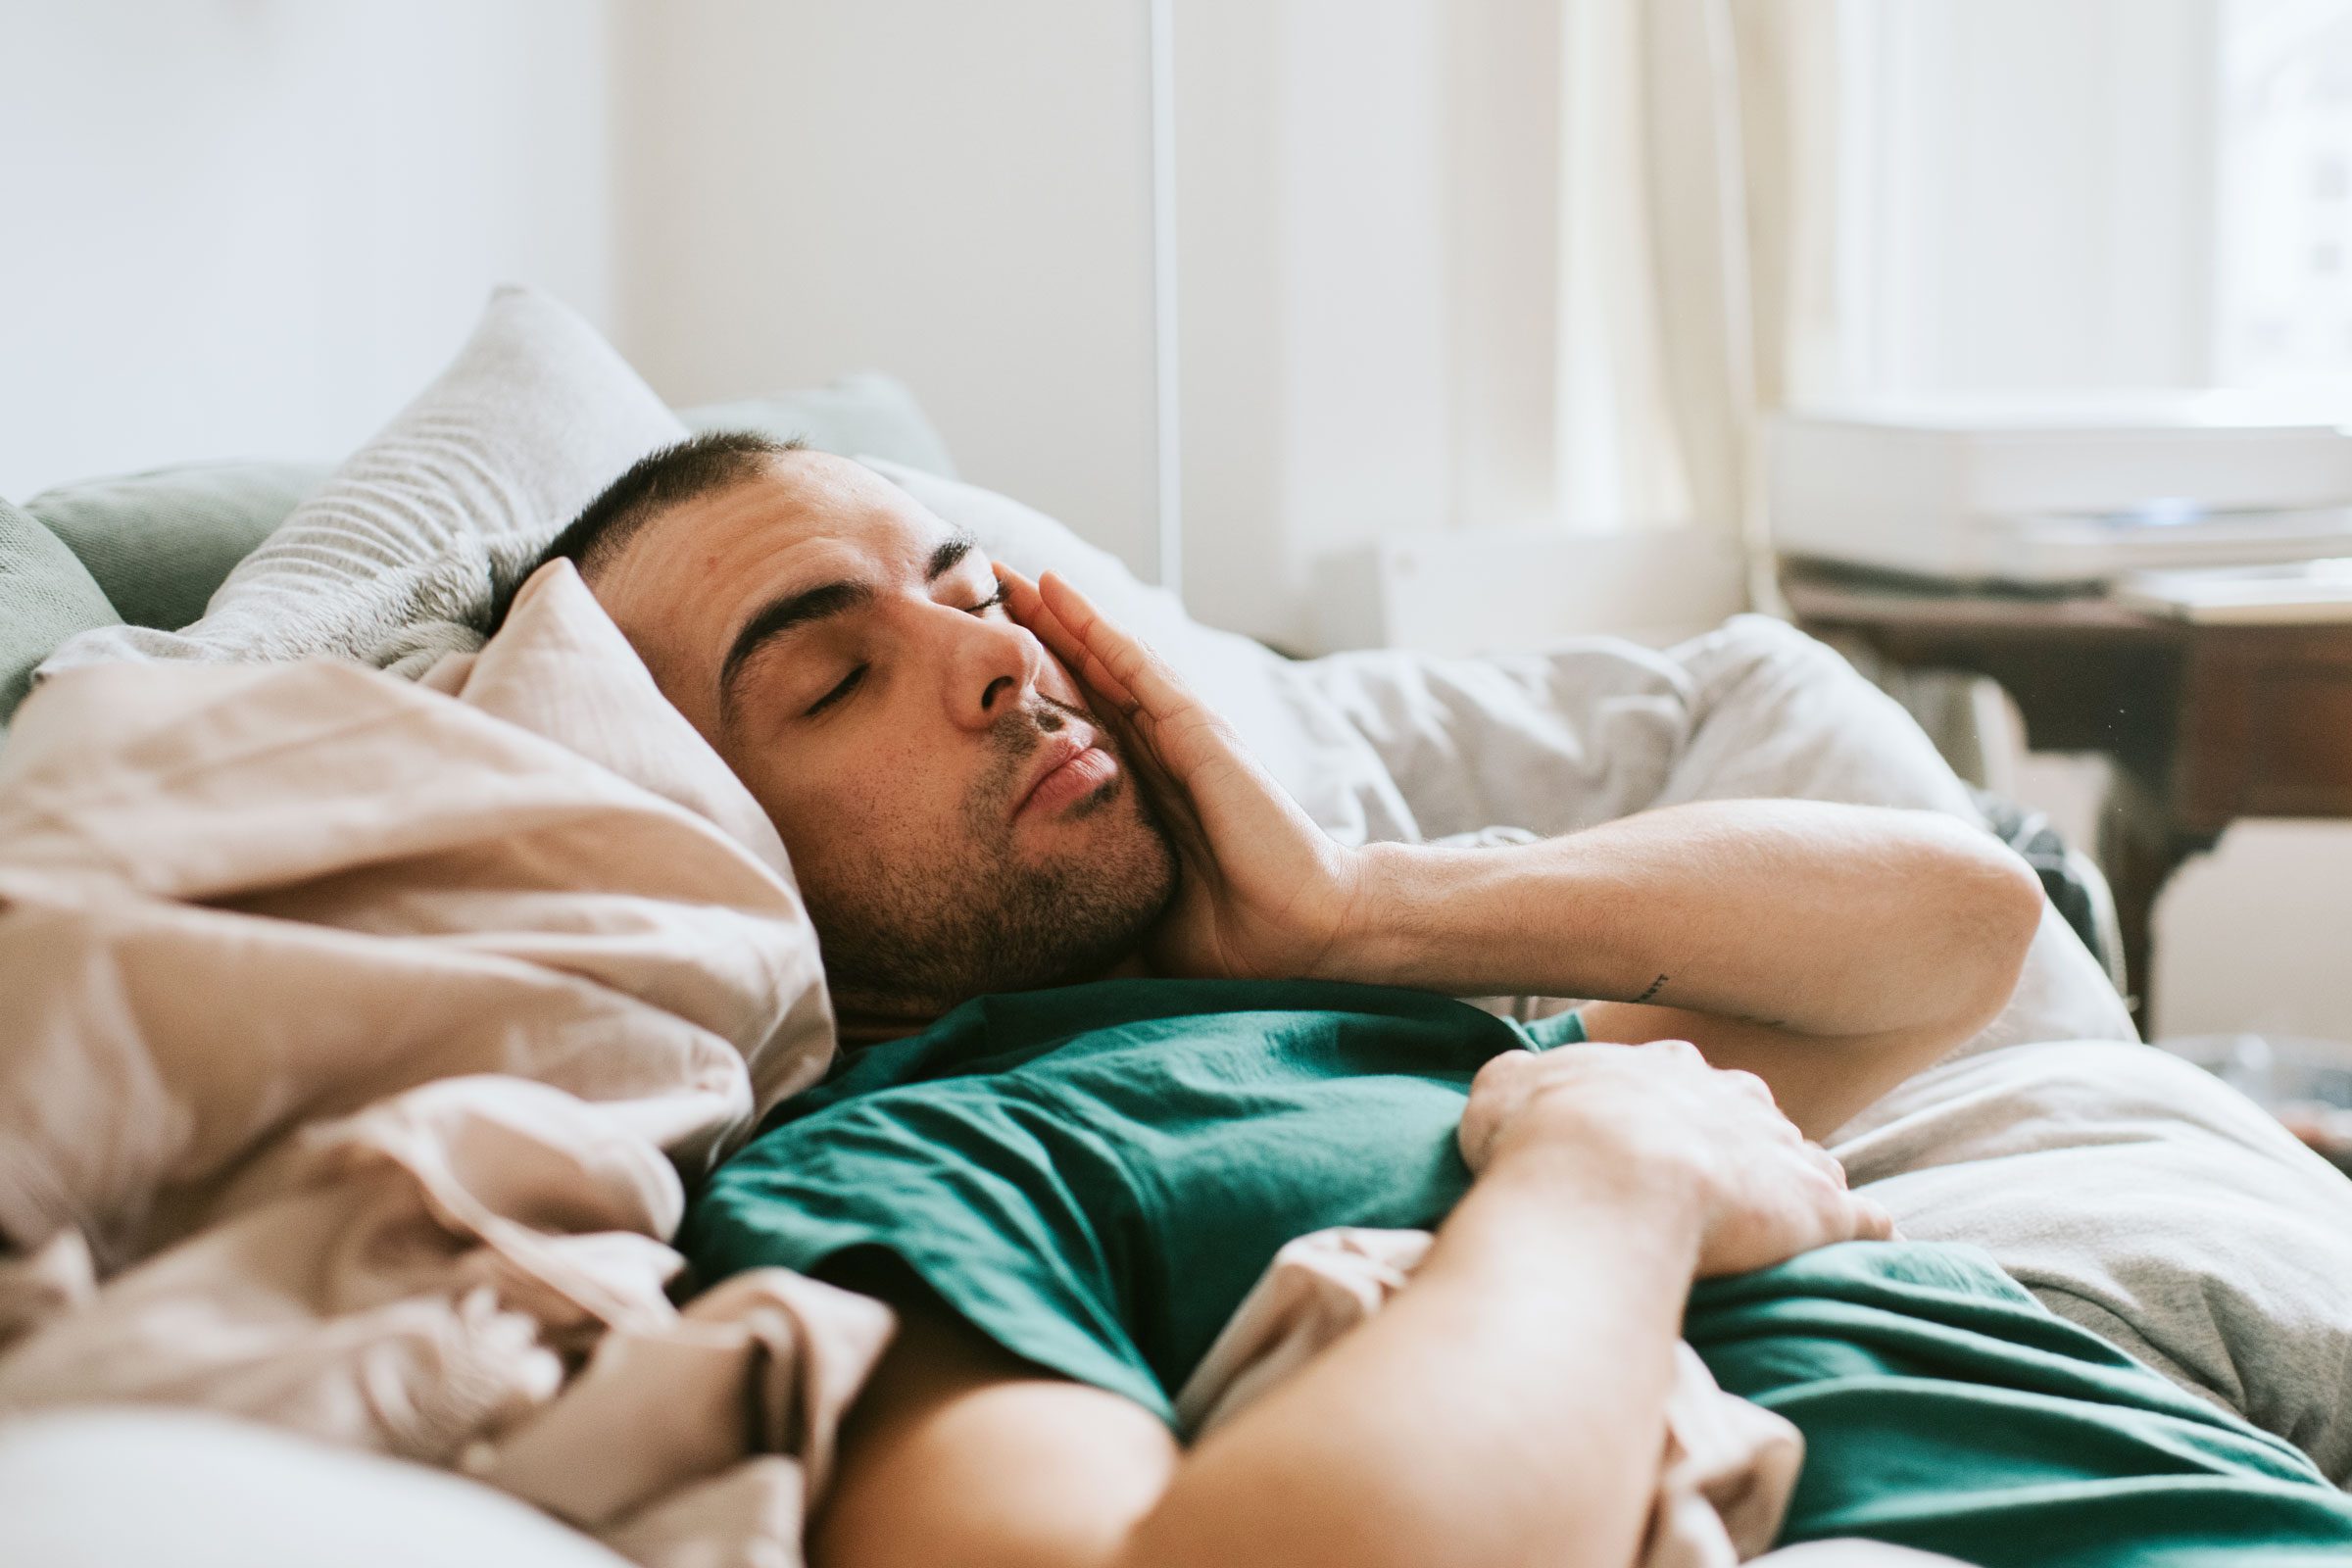 Are Naps Good for You? 4 Major Health Benefits of Napping from a Neurologist